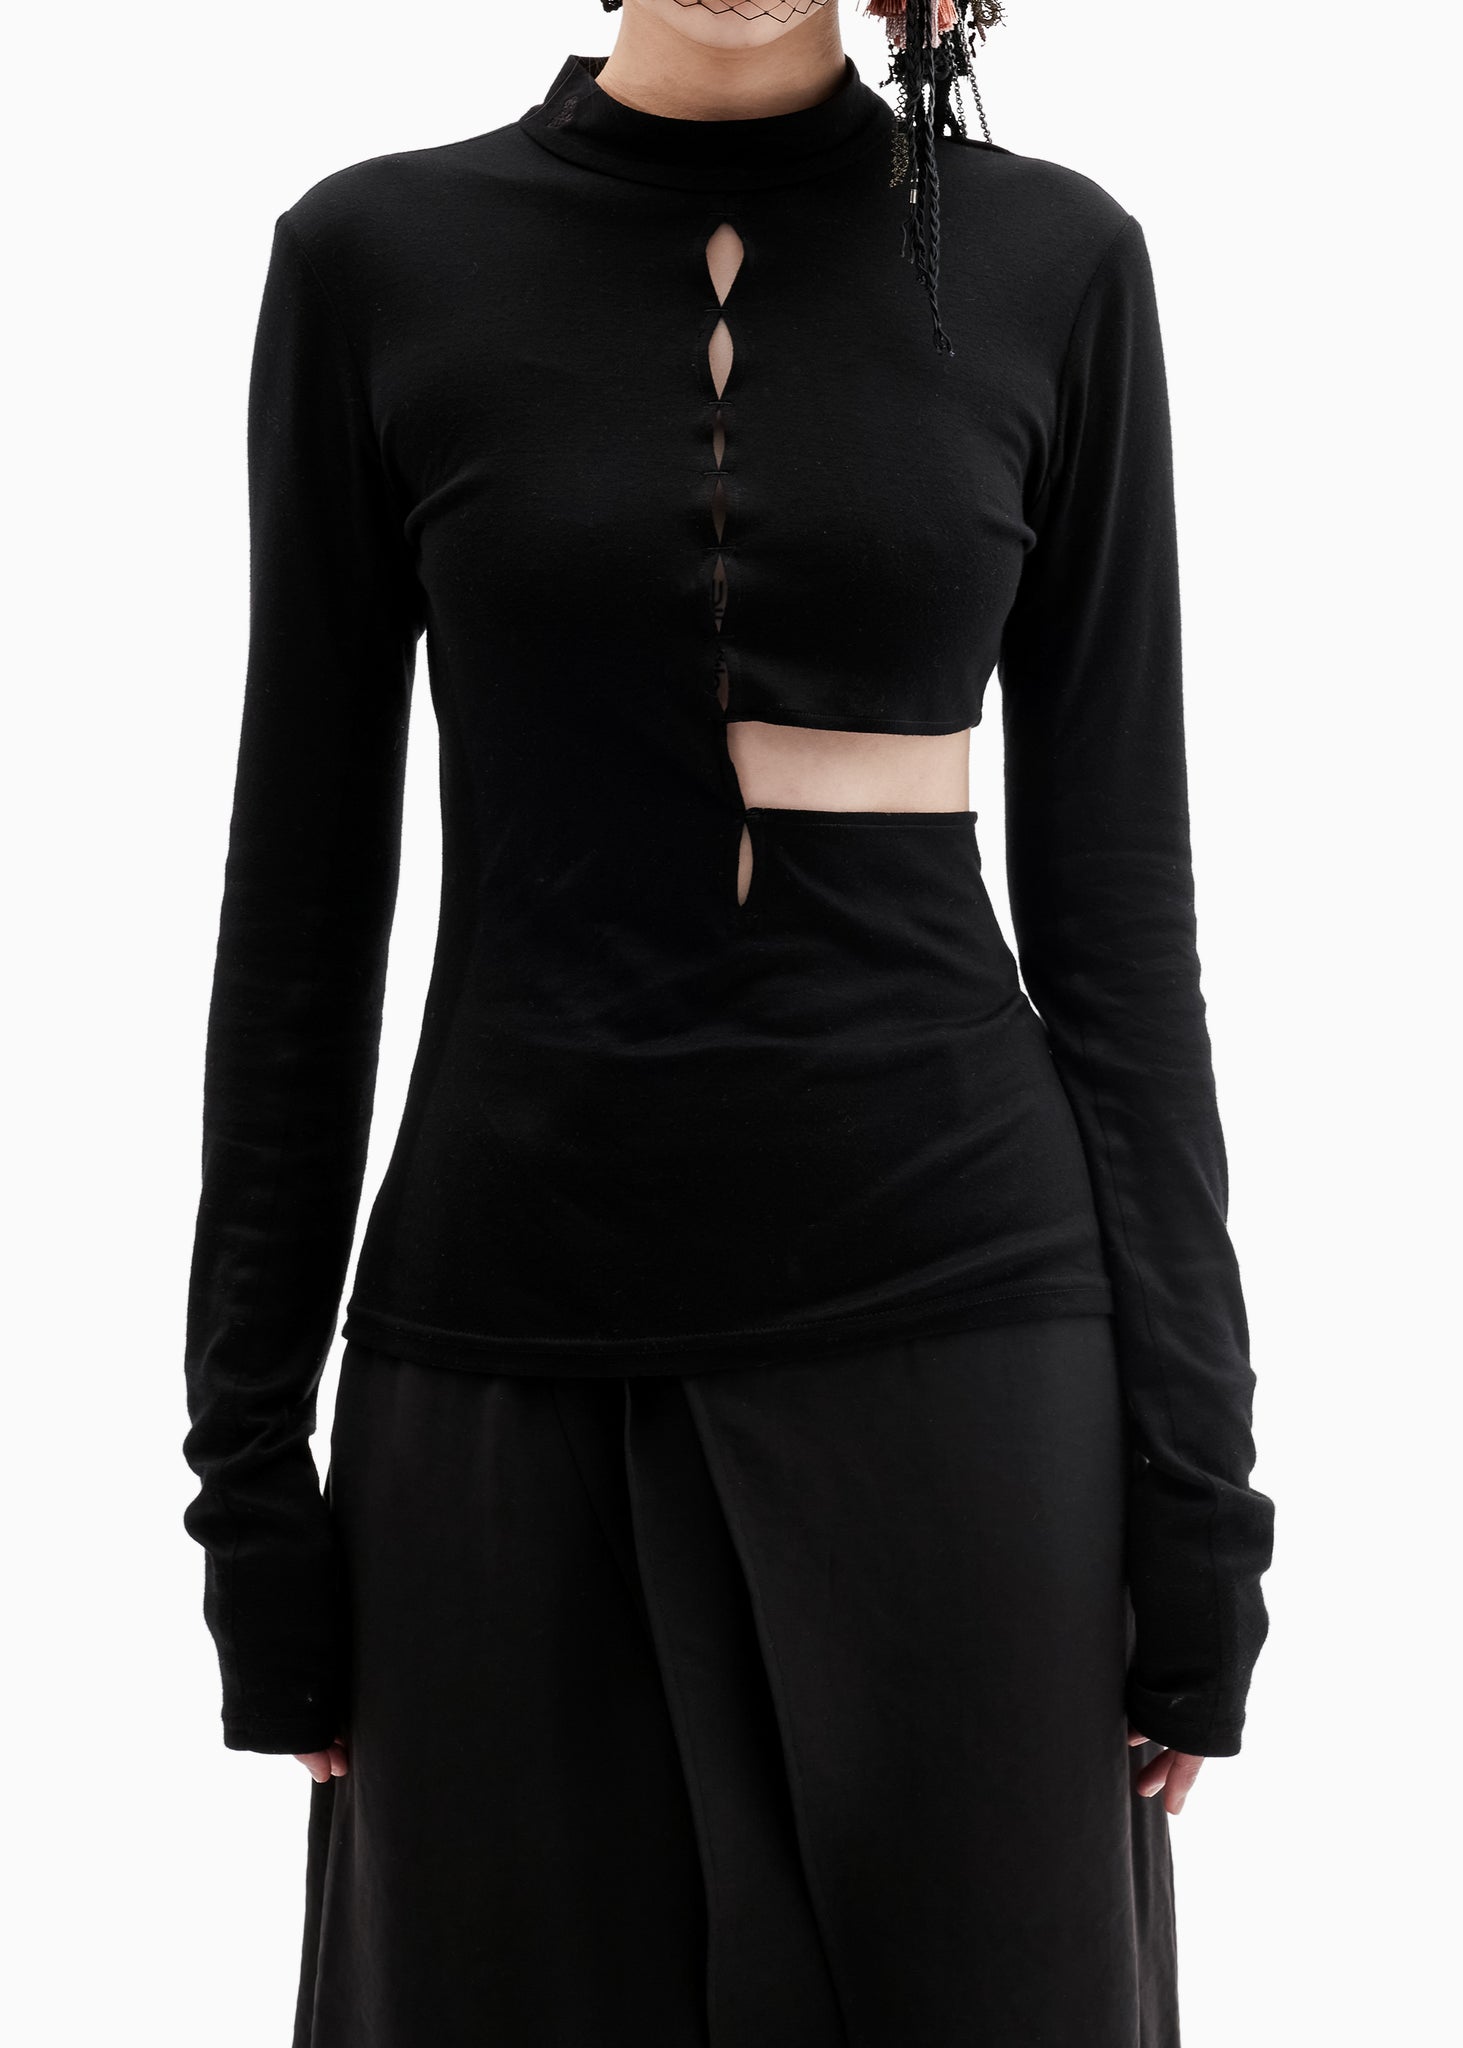 CUT-OUT FITTED TOP